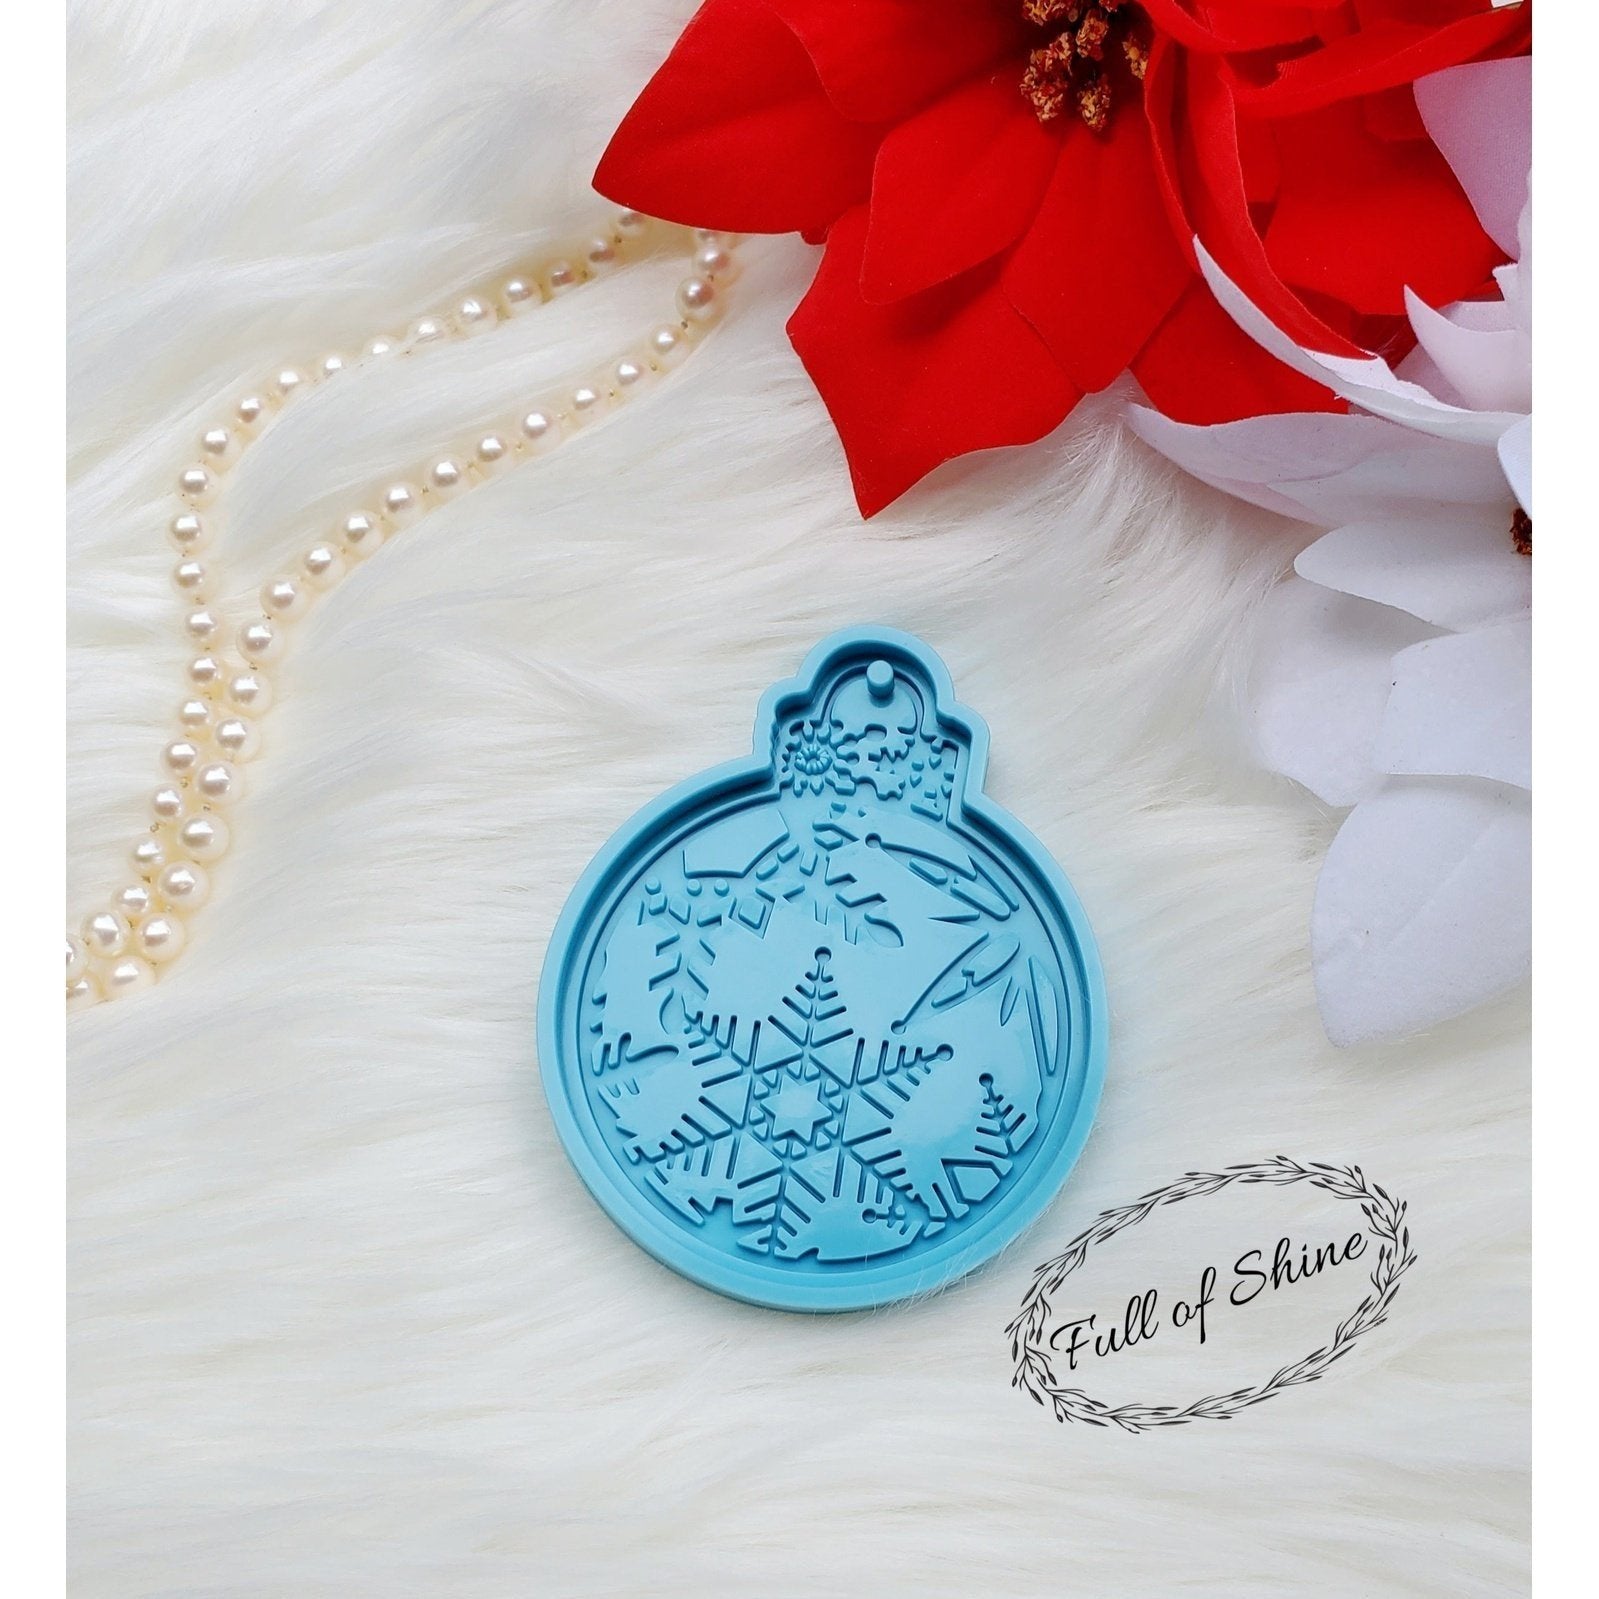 Snowflake and Ice Ornament Mold